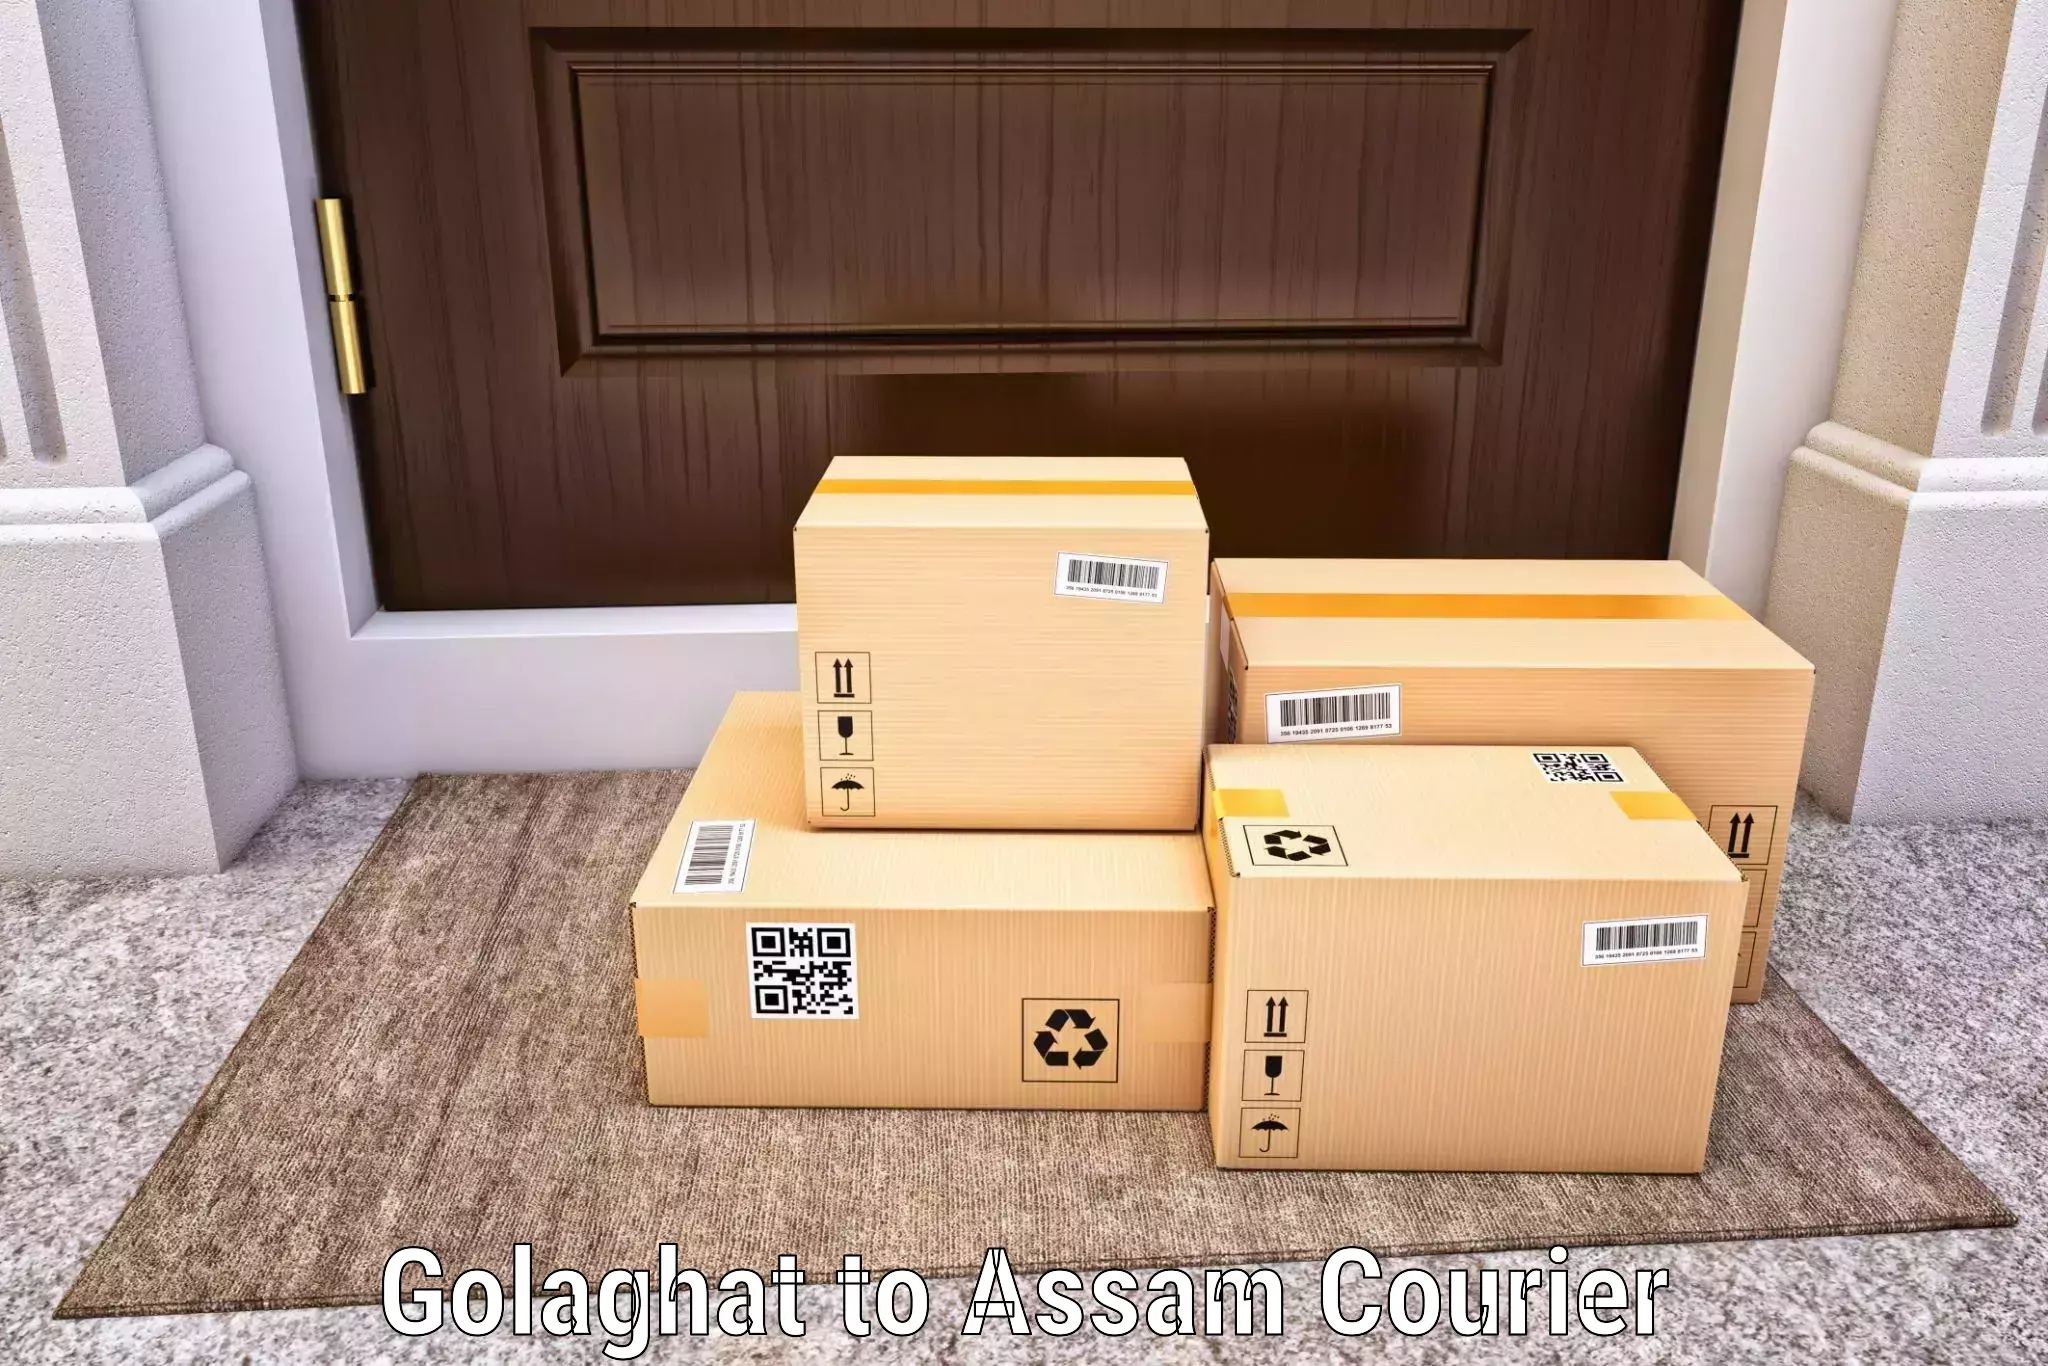 State-of-the-art courier technology Golaghat to Tengakhat